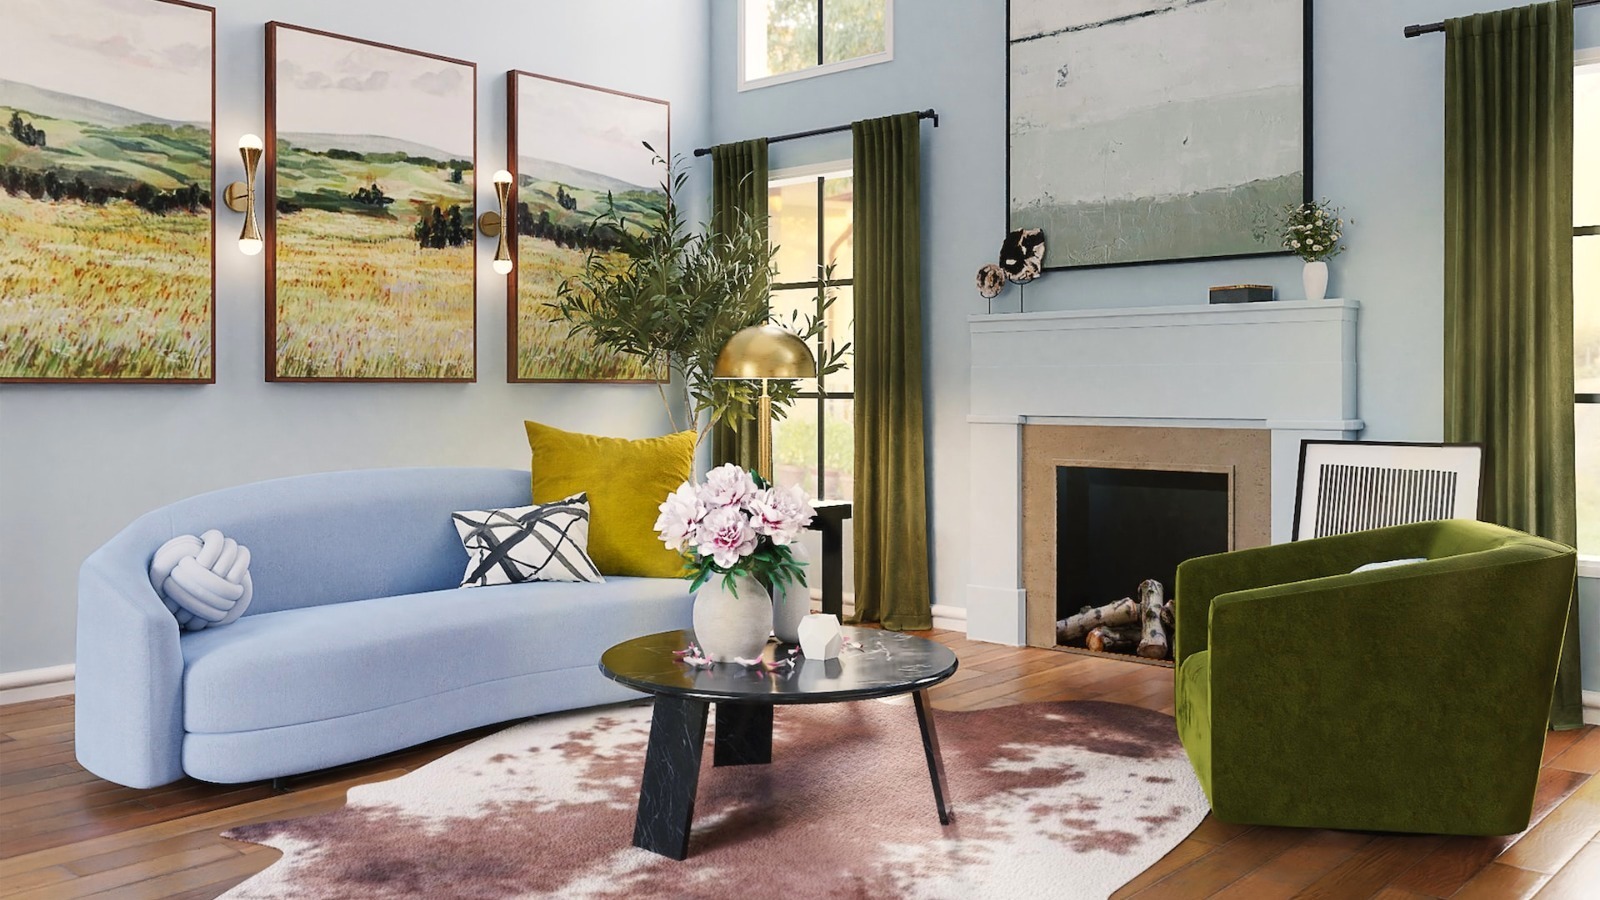 What Is An Analogous Color Scheme And How To Use It In Your Home ...